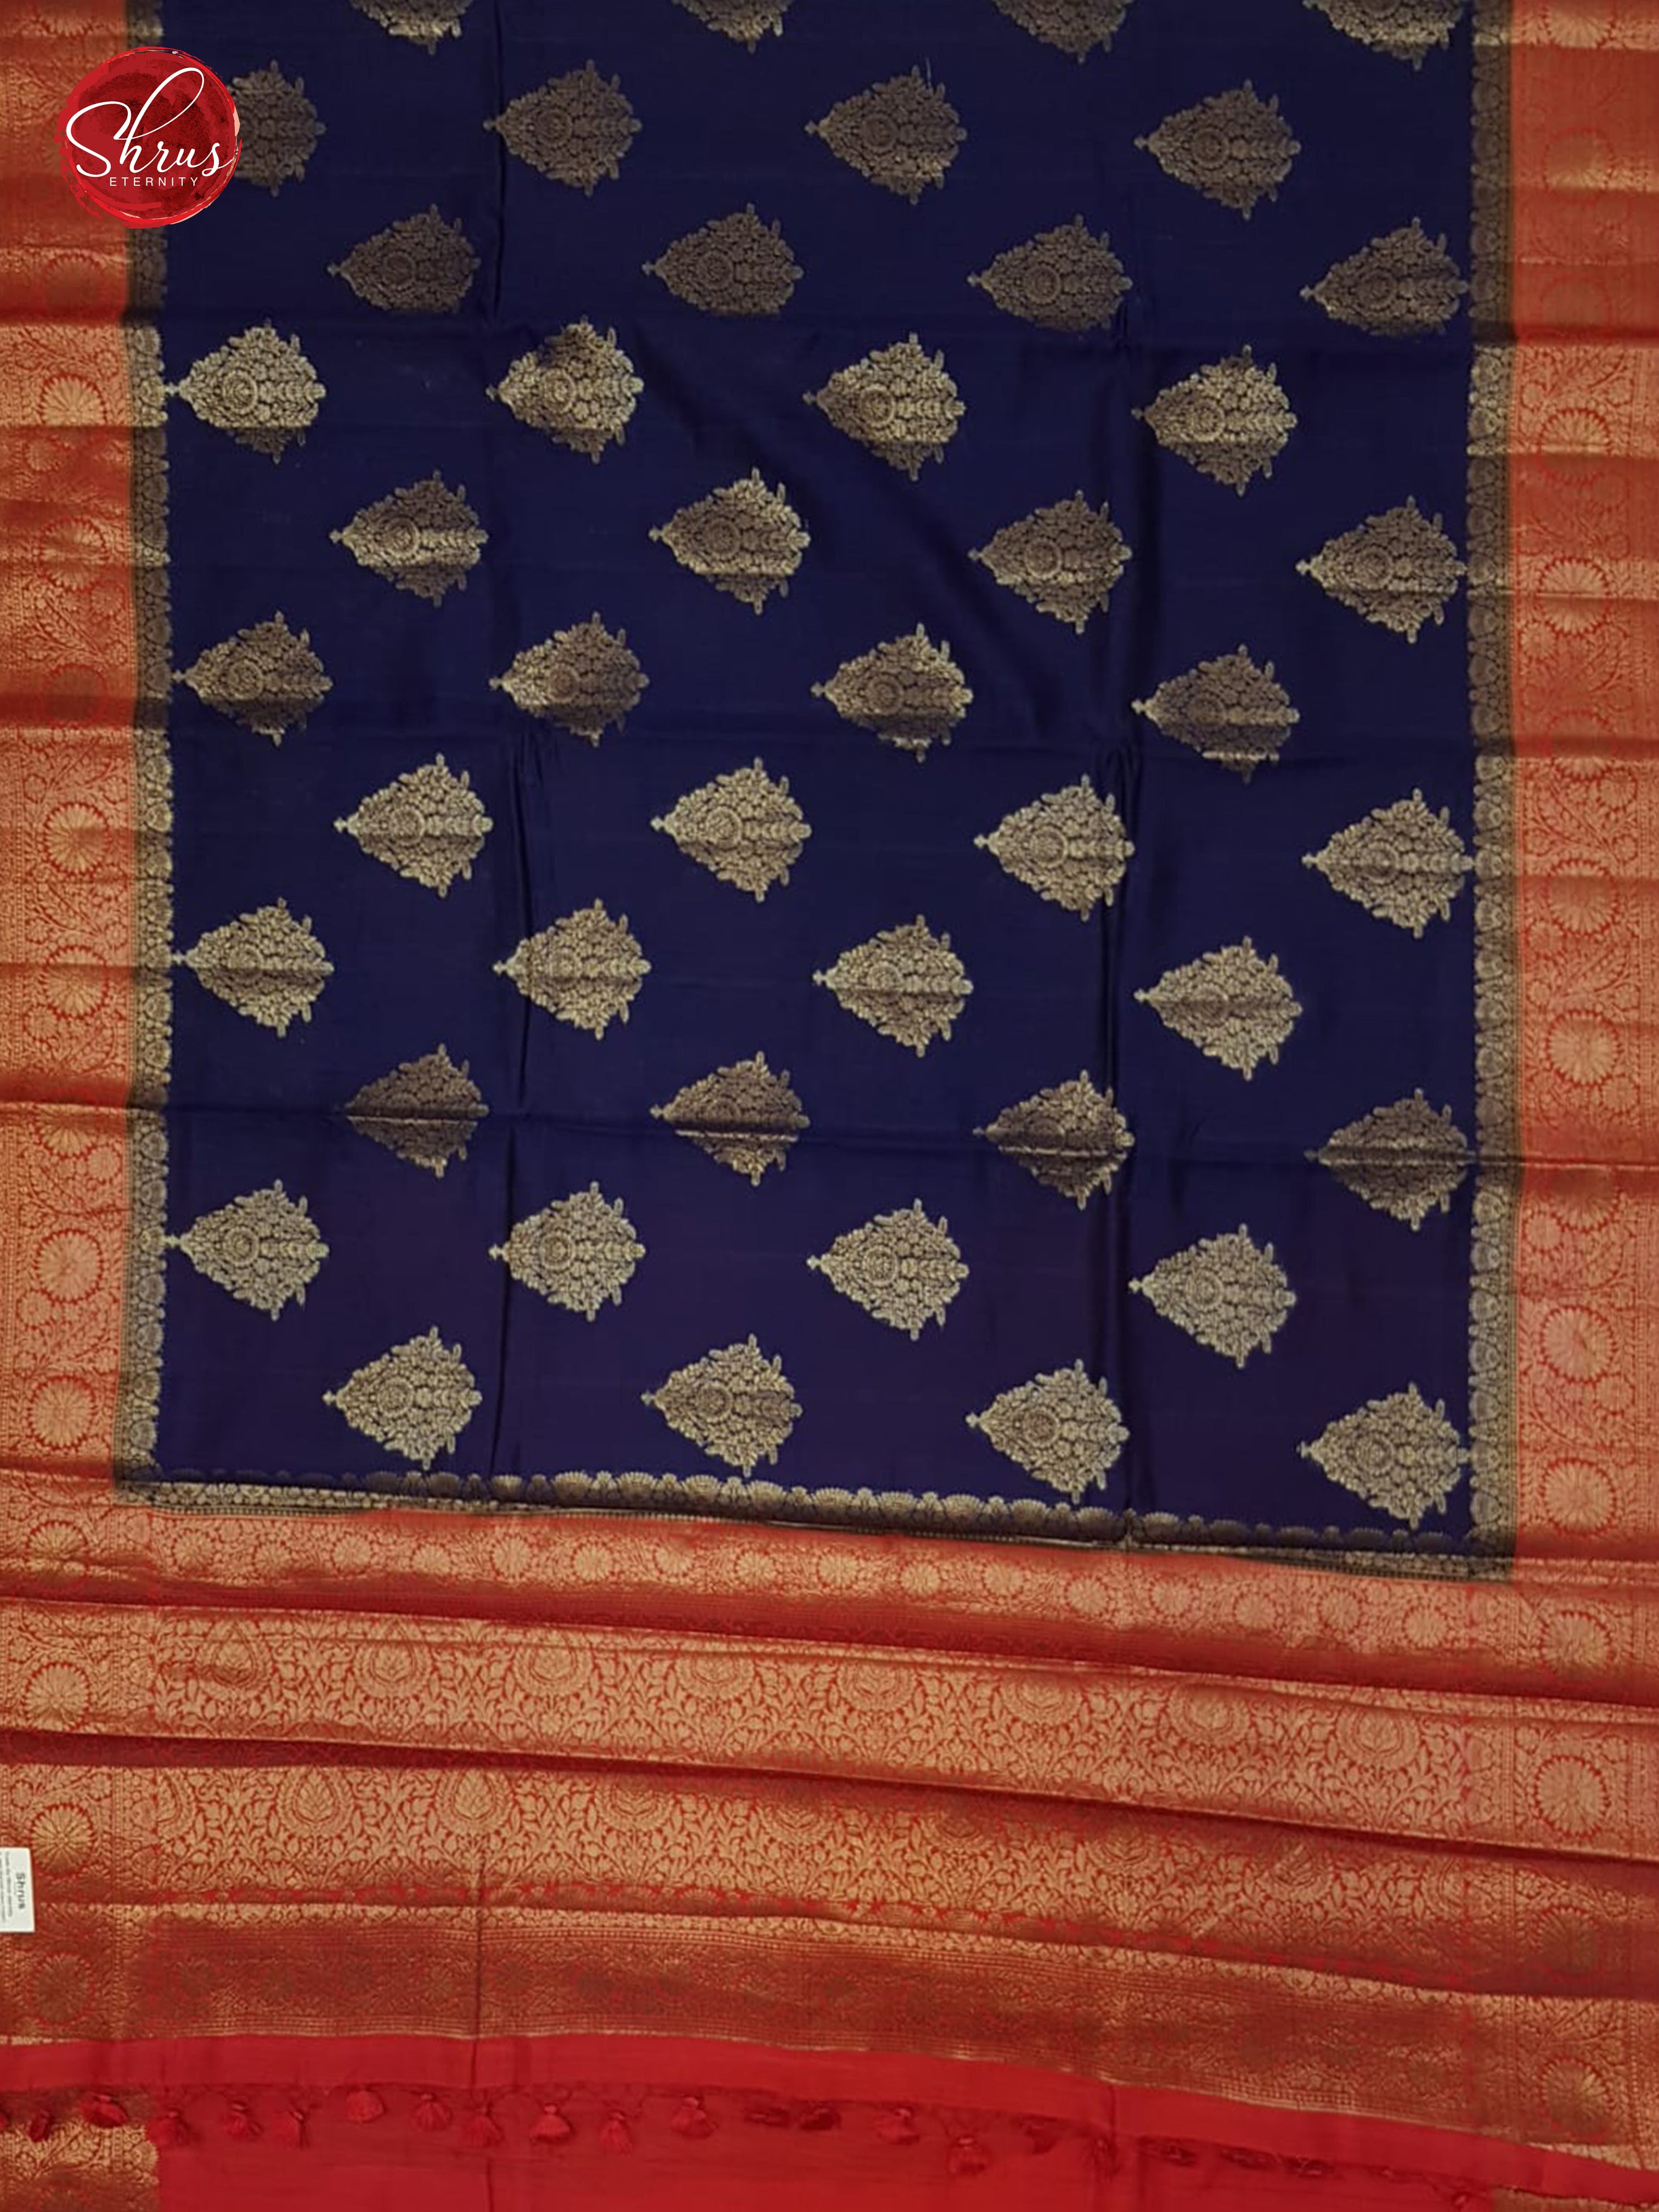 Blue & Red-  Tussar with zari woven floral motifs on the body & Zari Border - Shop on ShrusEternity.com